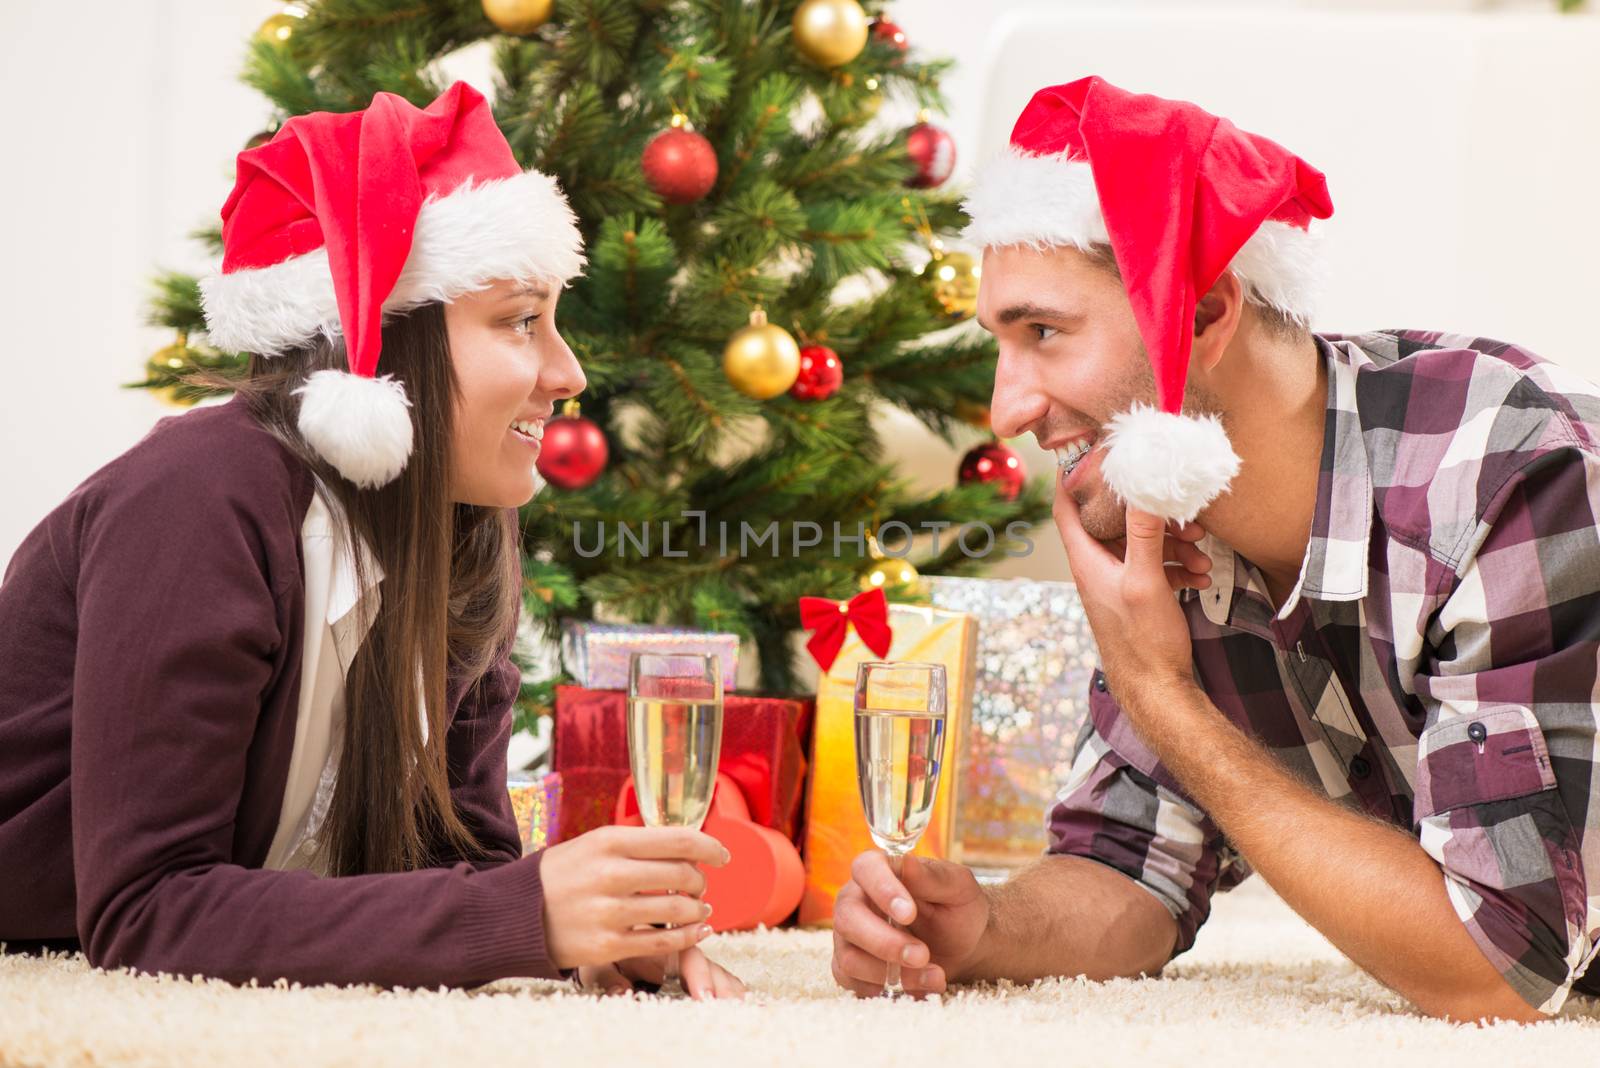 Young beautiful couple Celebrating Christmas or New Year with glass of champagne.